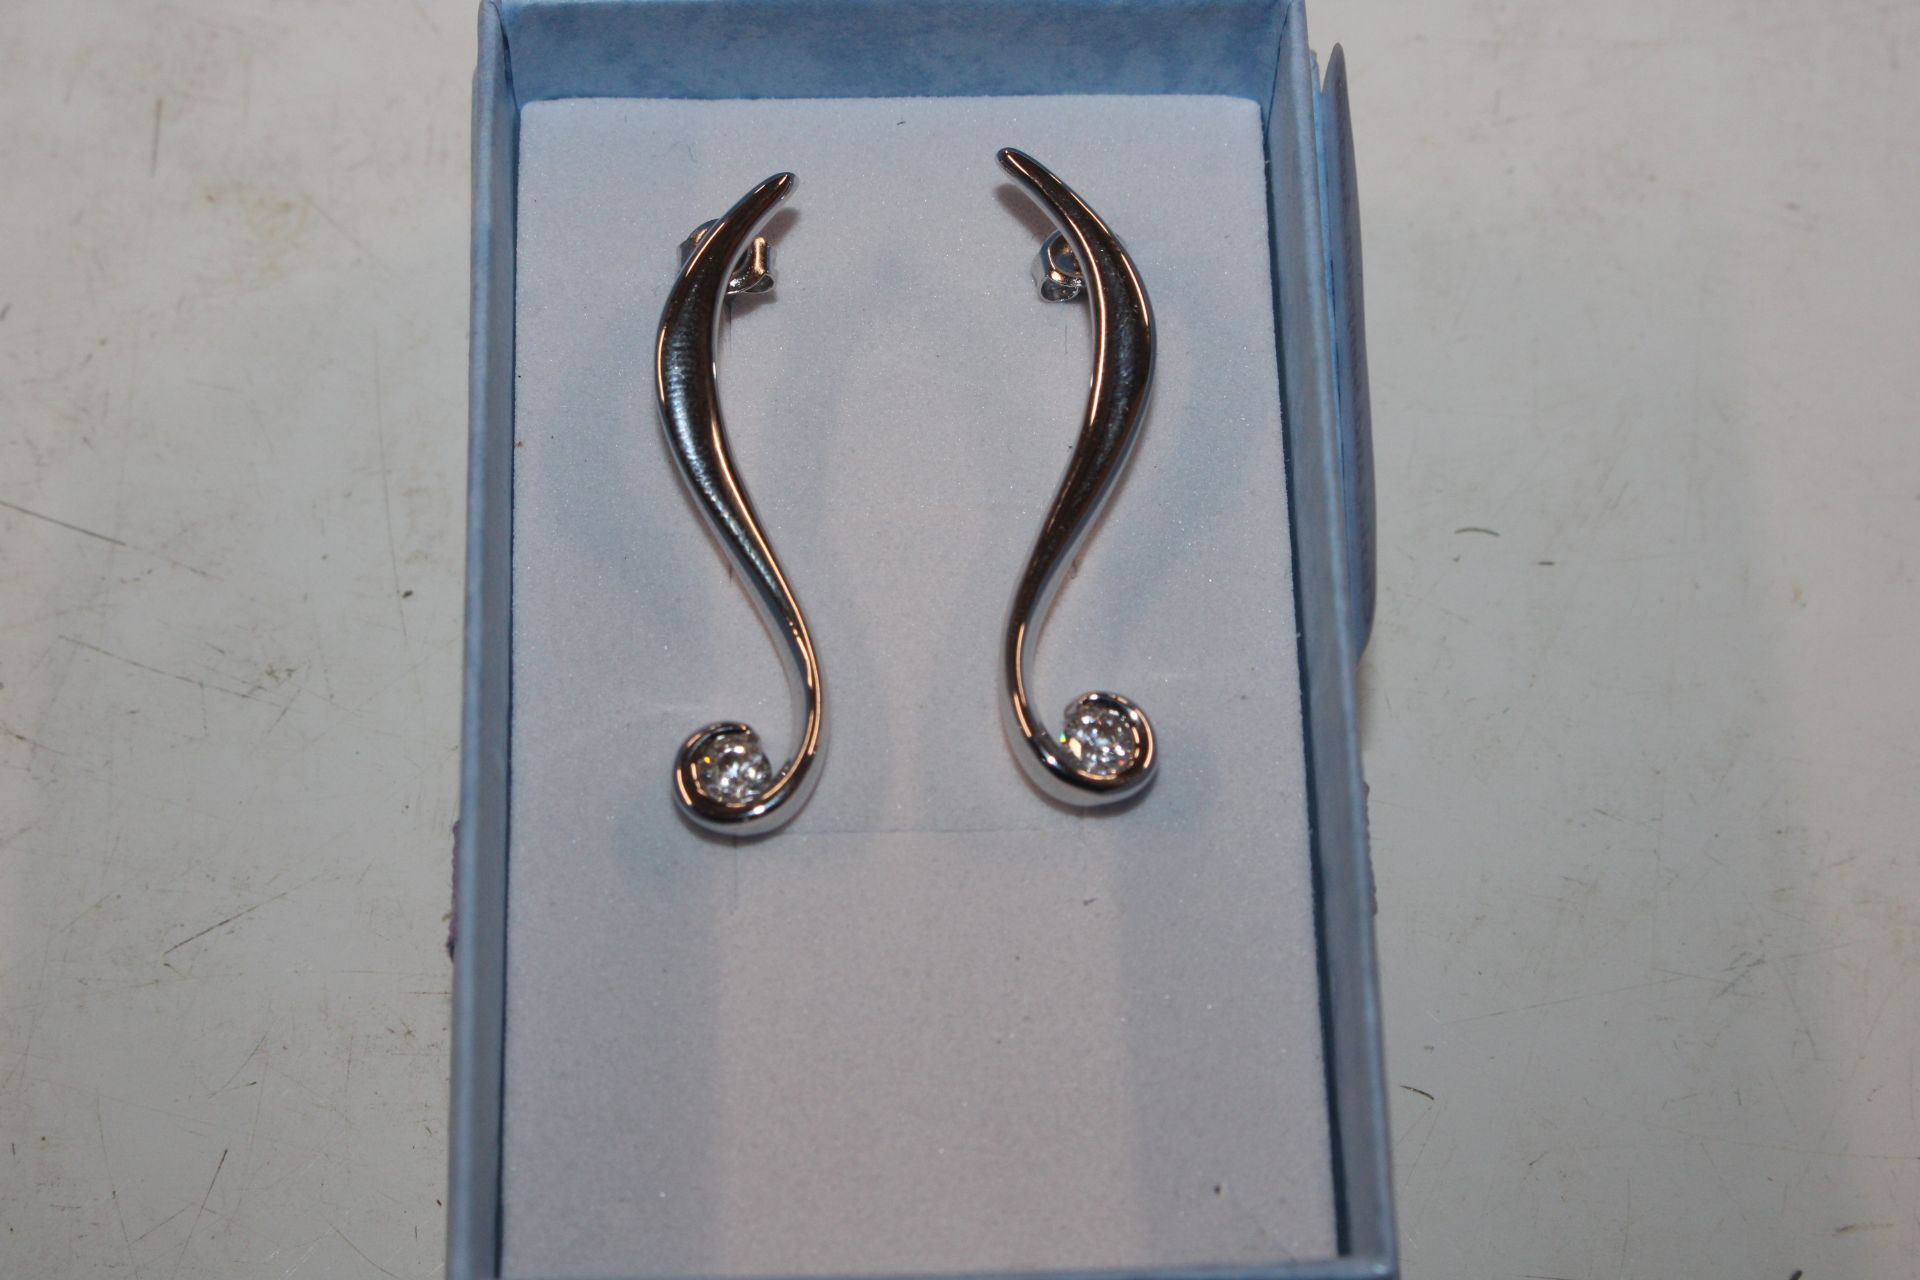 A pair of long Sterling silver and cubic zirconia